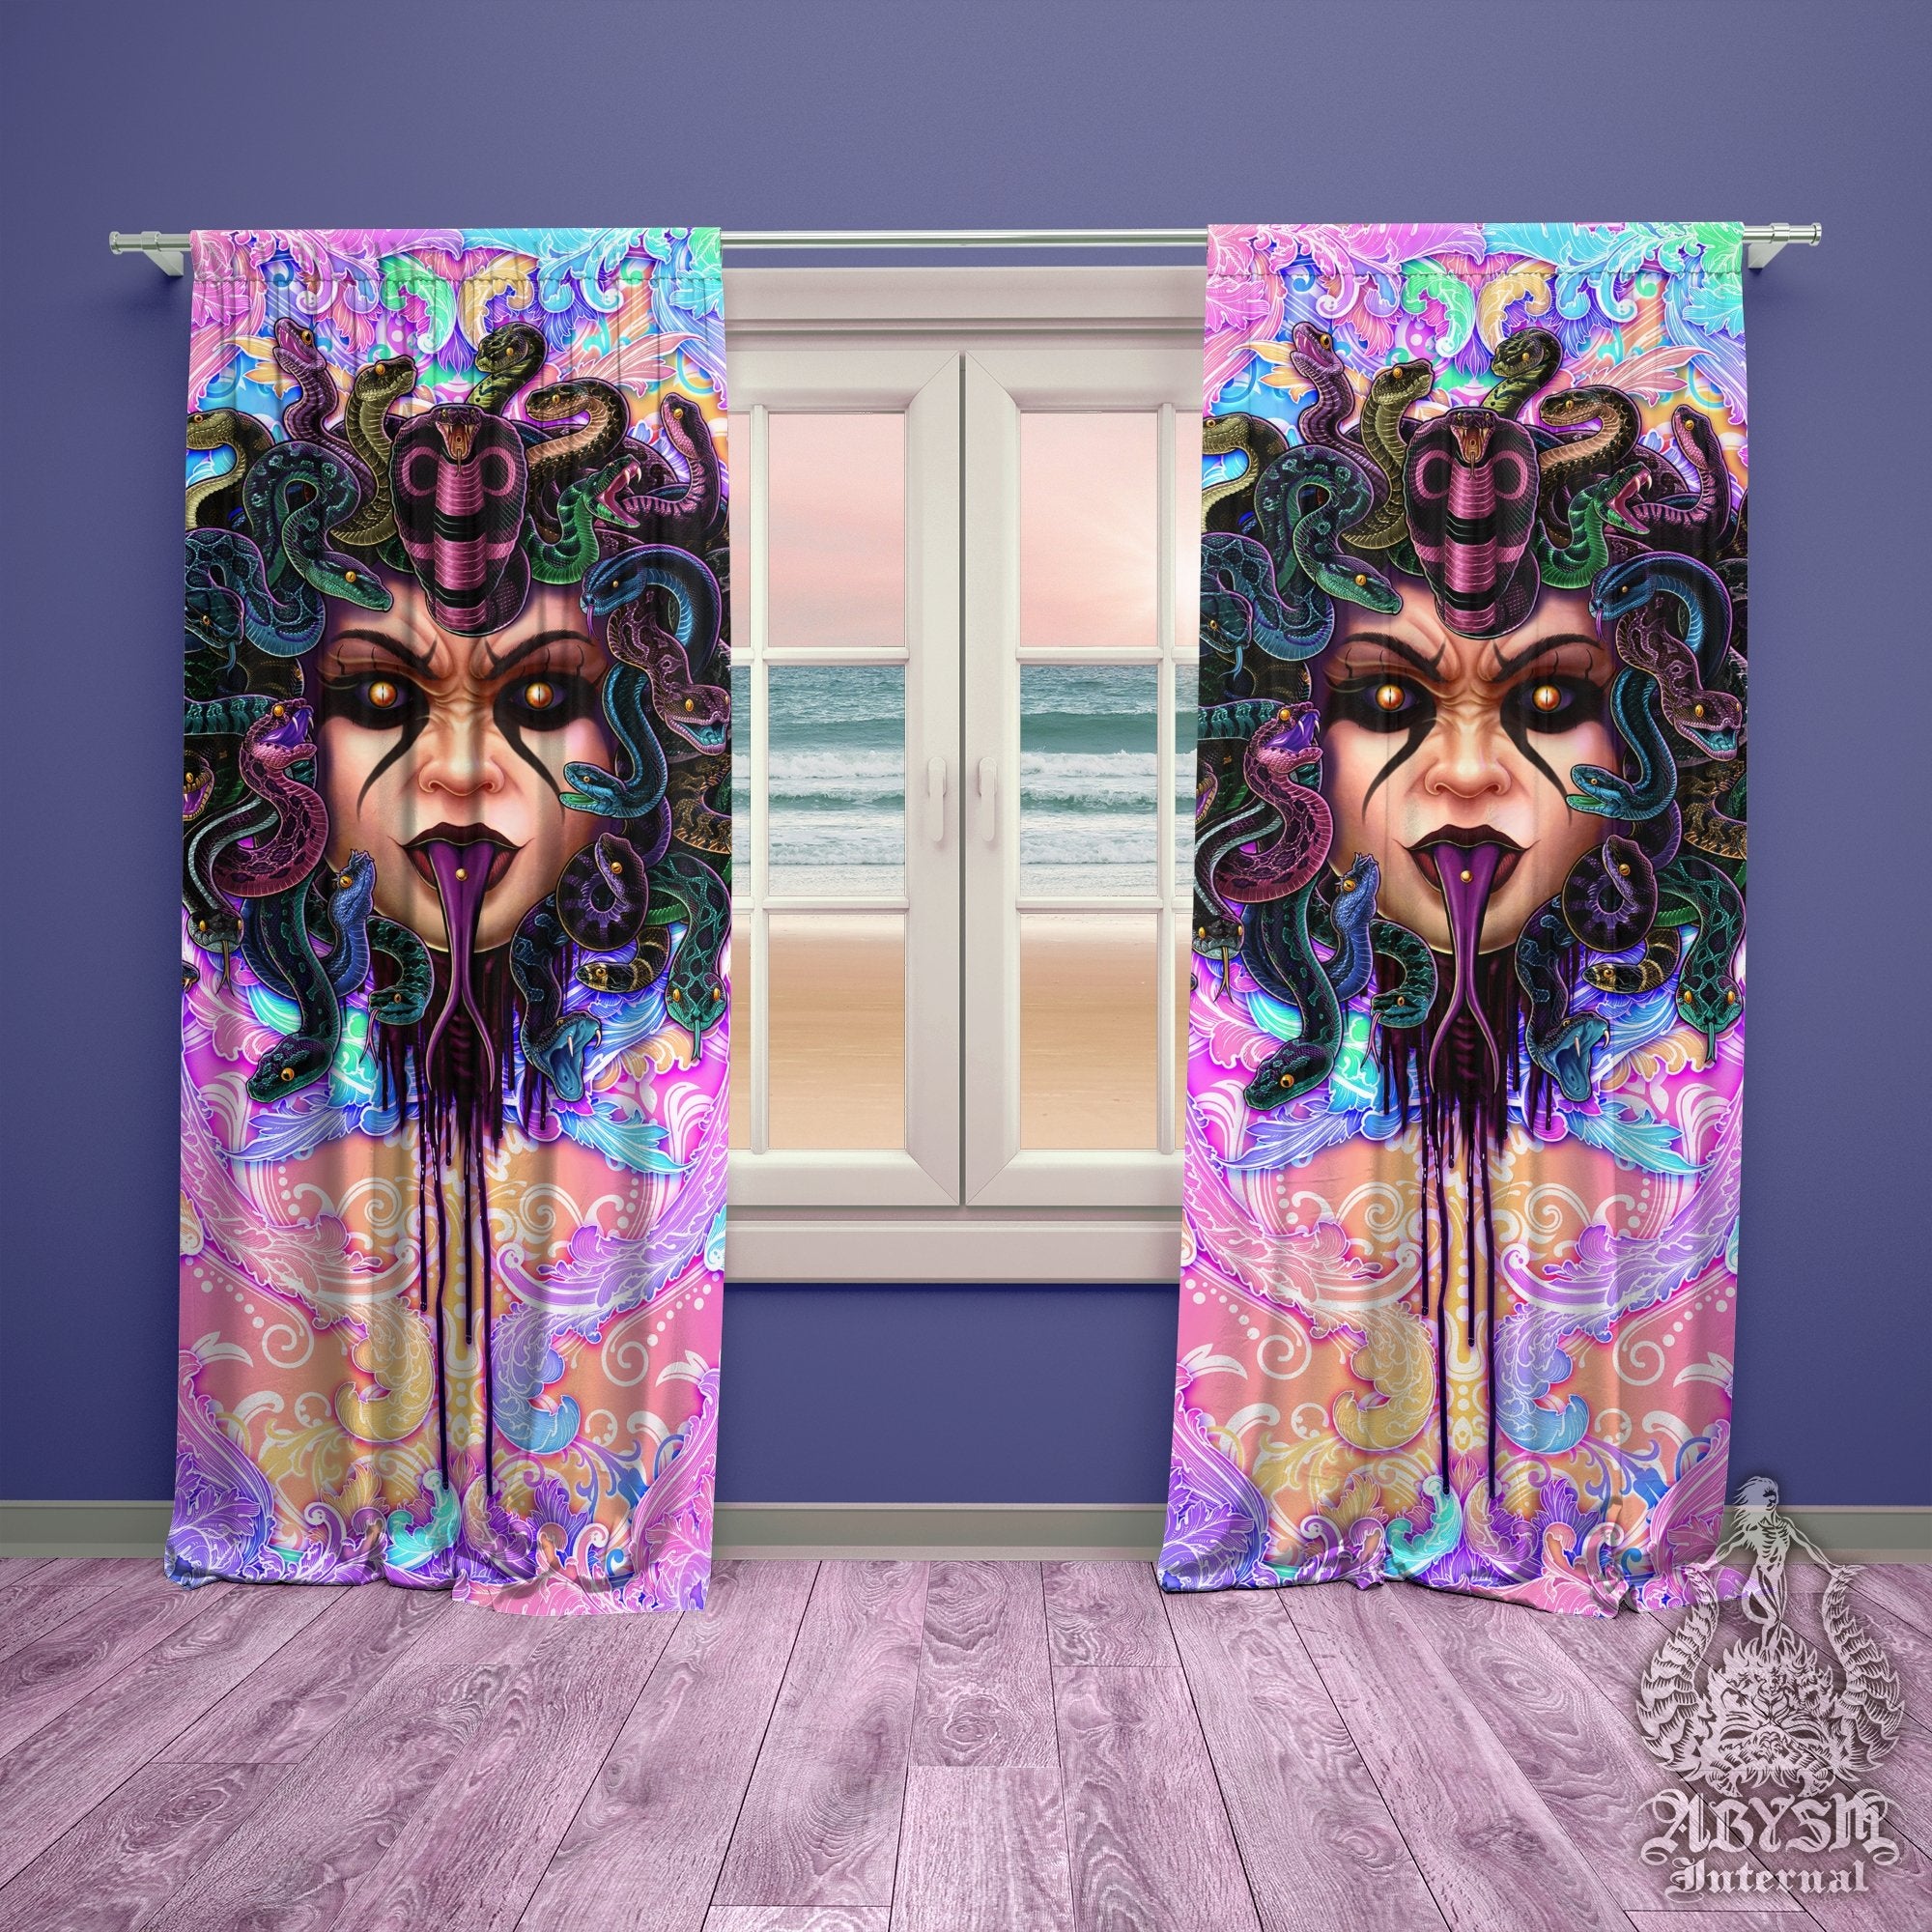 Psychedelic Medusa Blackout Curtains, Long Window Panels, Aesthetic Art Print, Kawaii Gamer Room Decor, Funky and Eclectic Home Decor - Pastel Punk Black & Snakes, Mocking - Abysm Internal